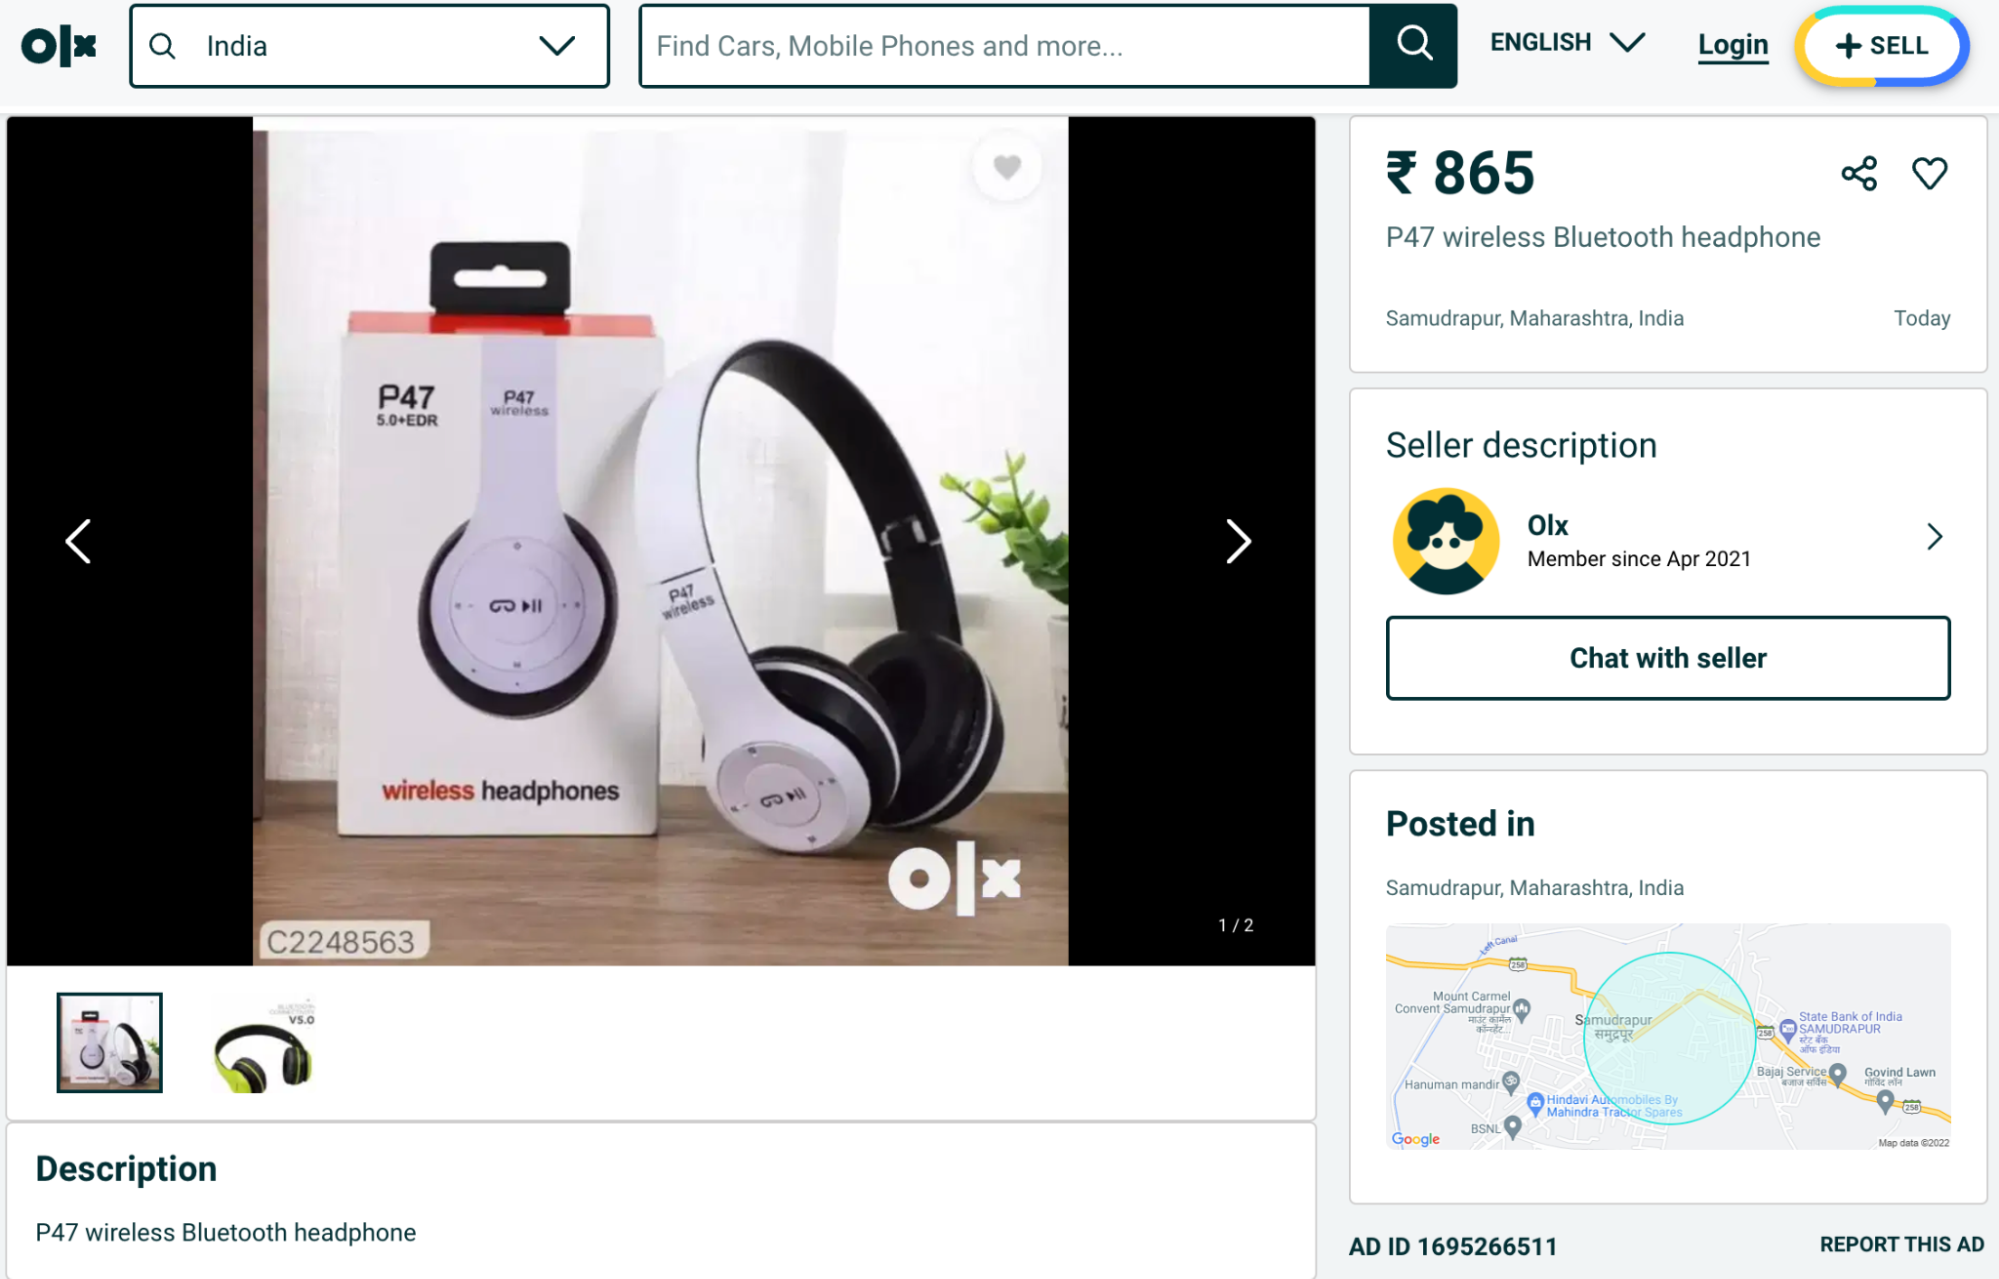 OLX product listing for bluetooth wireless headphones.